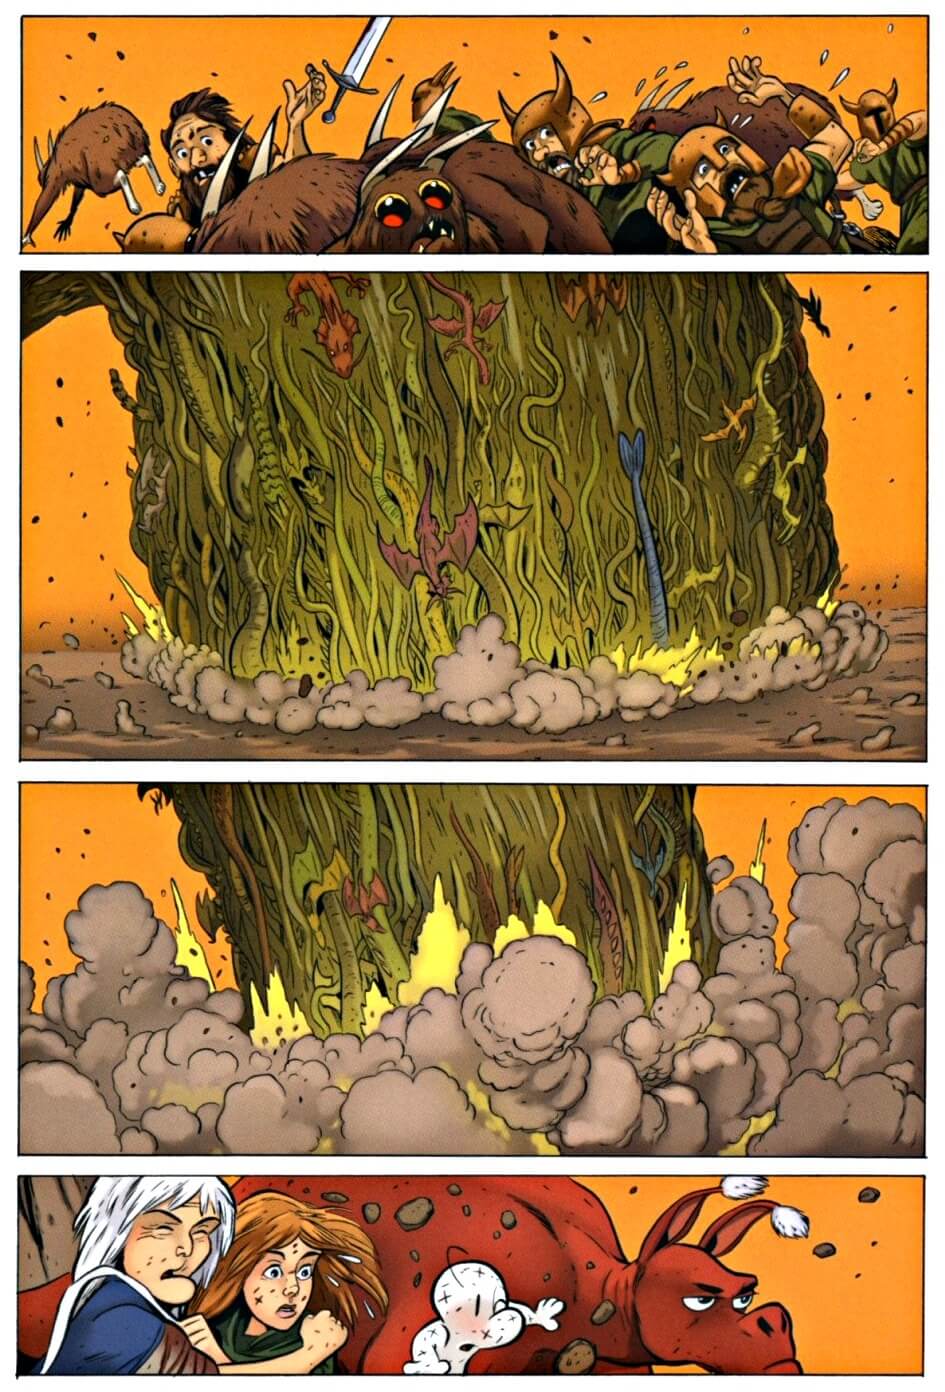 page 177 chapter 6 of bone 9 crown of horns graphic novel